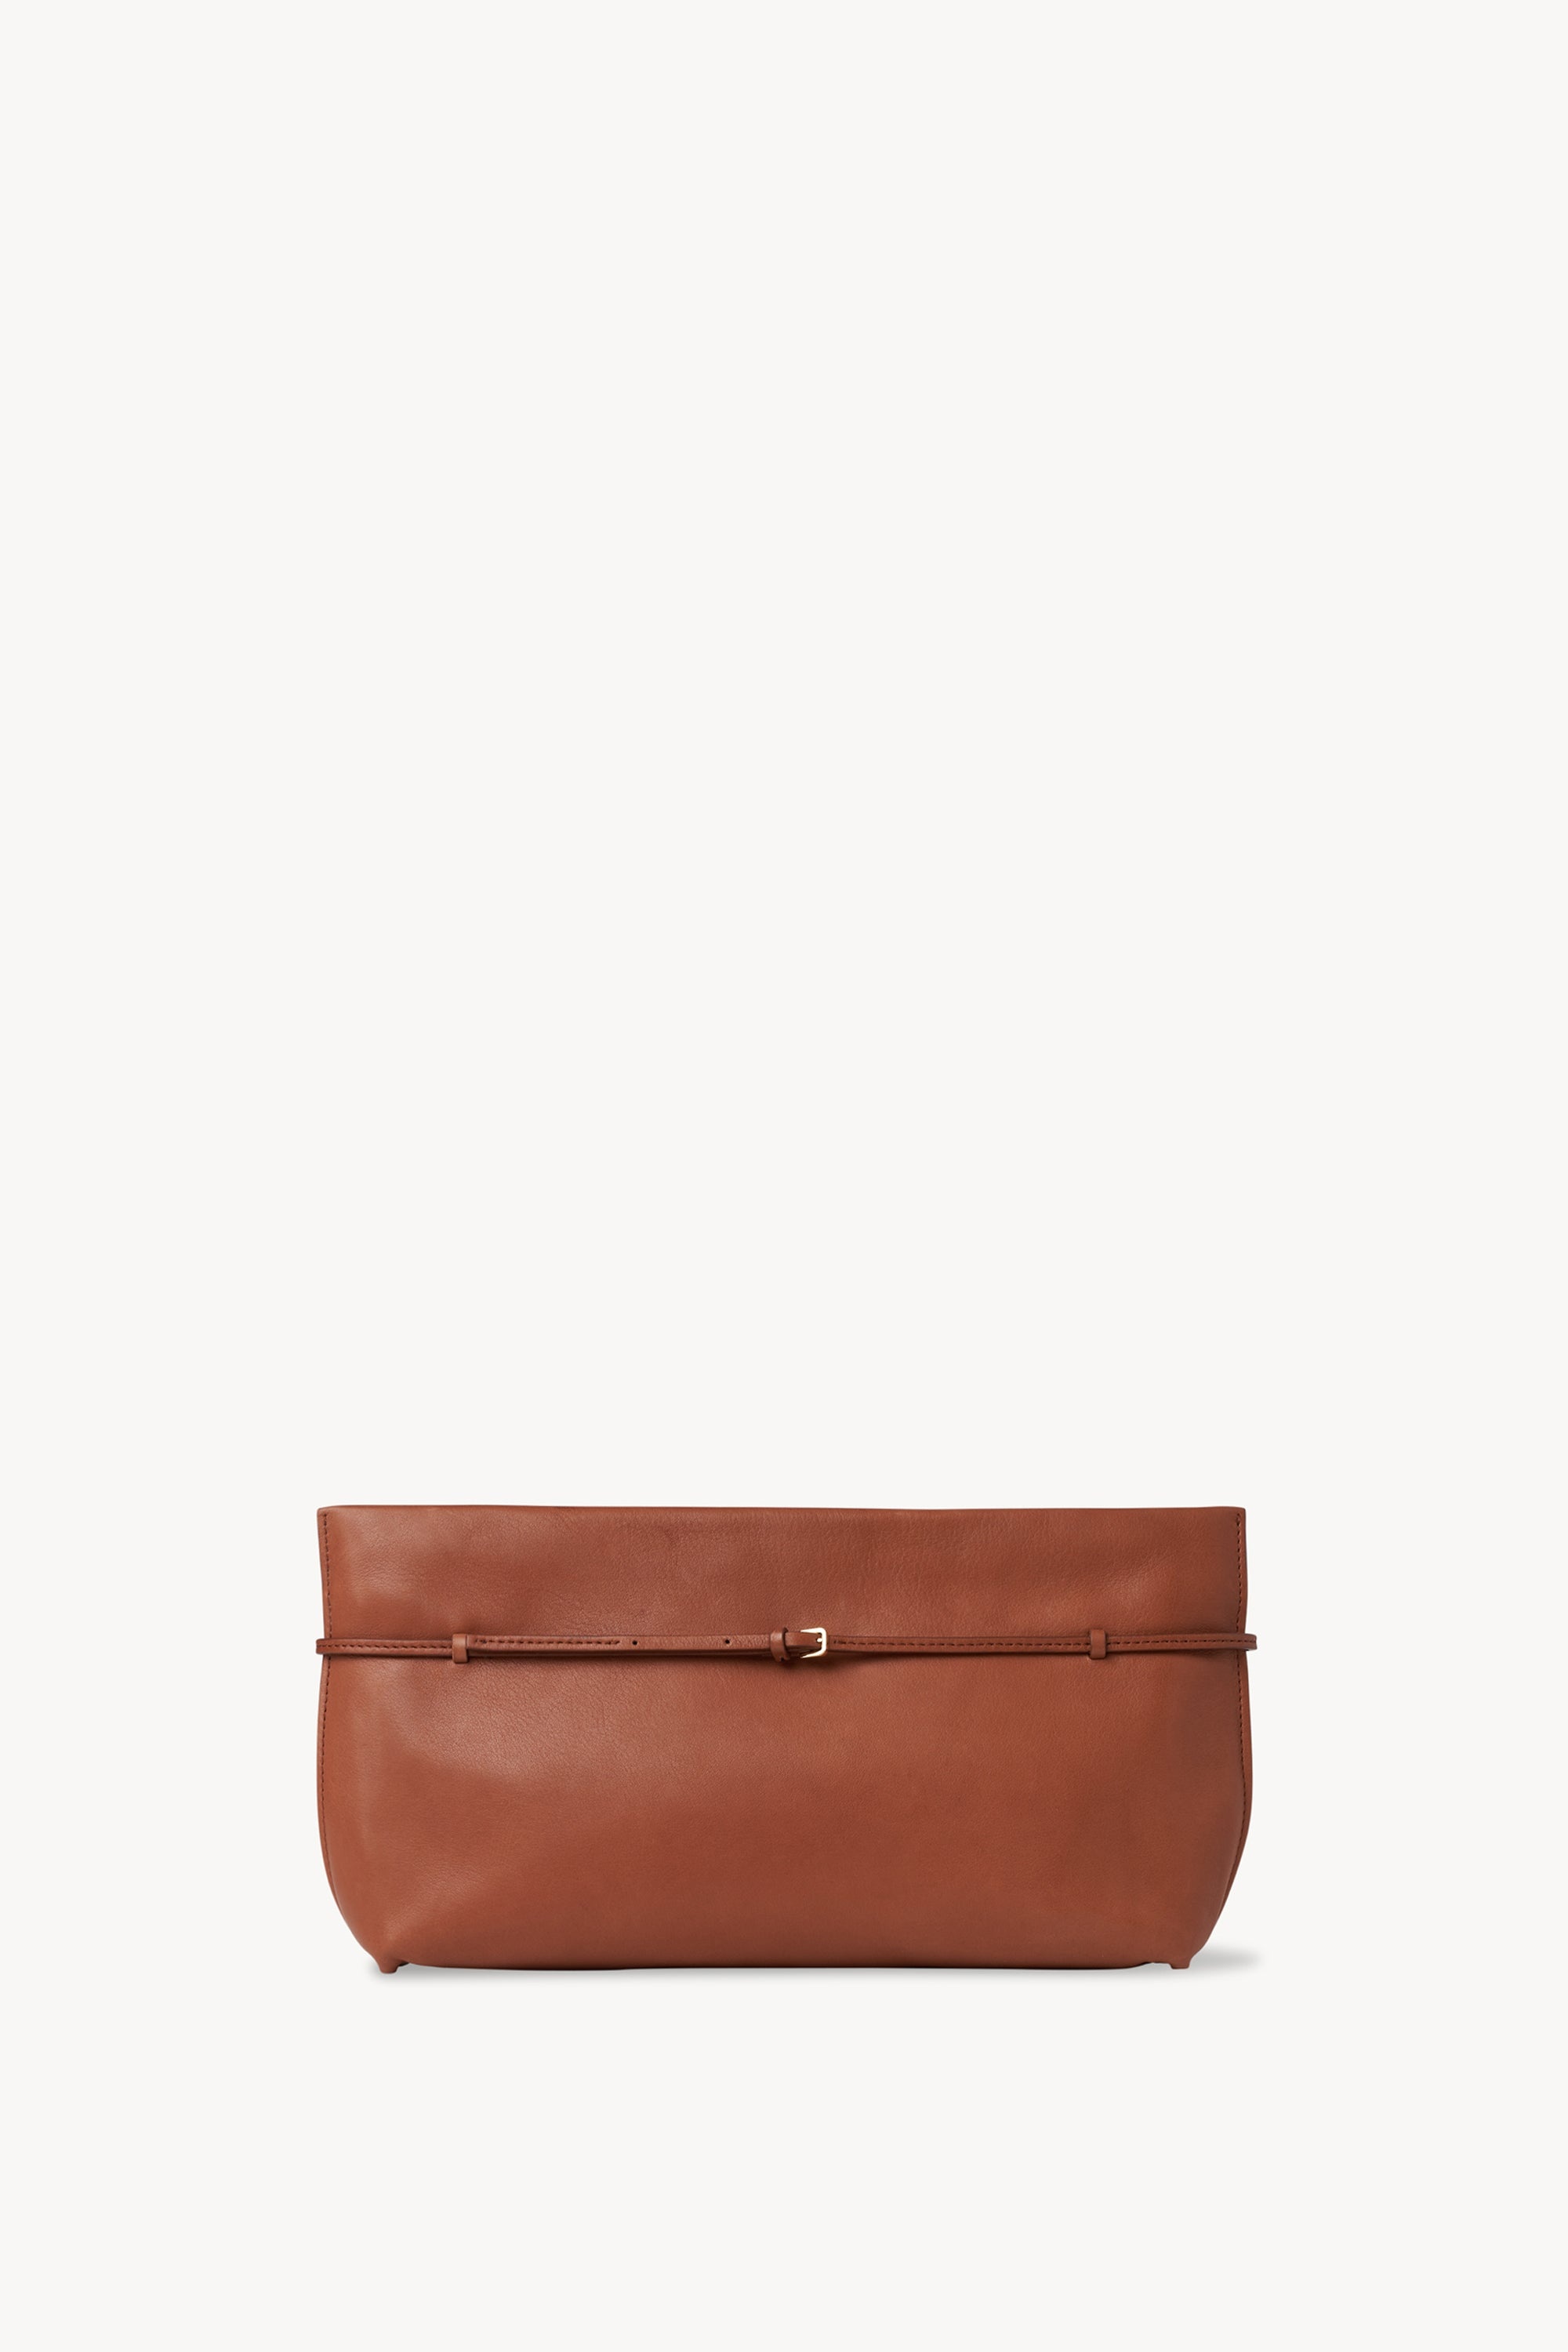 Sienna Clutch in Leather - 1